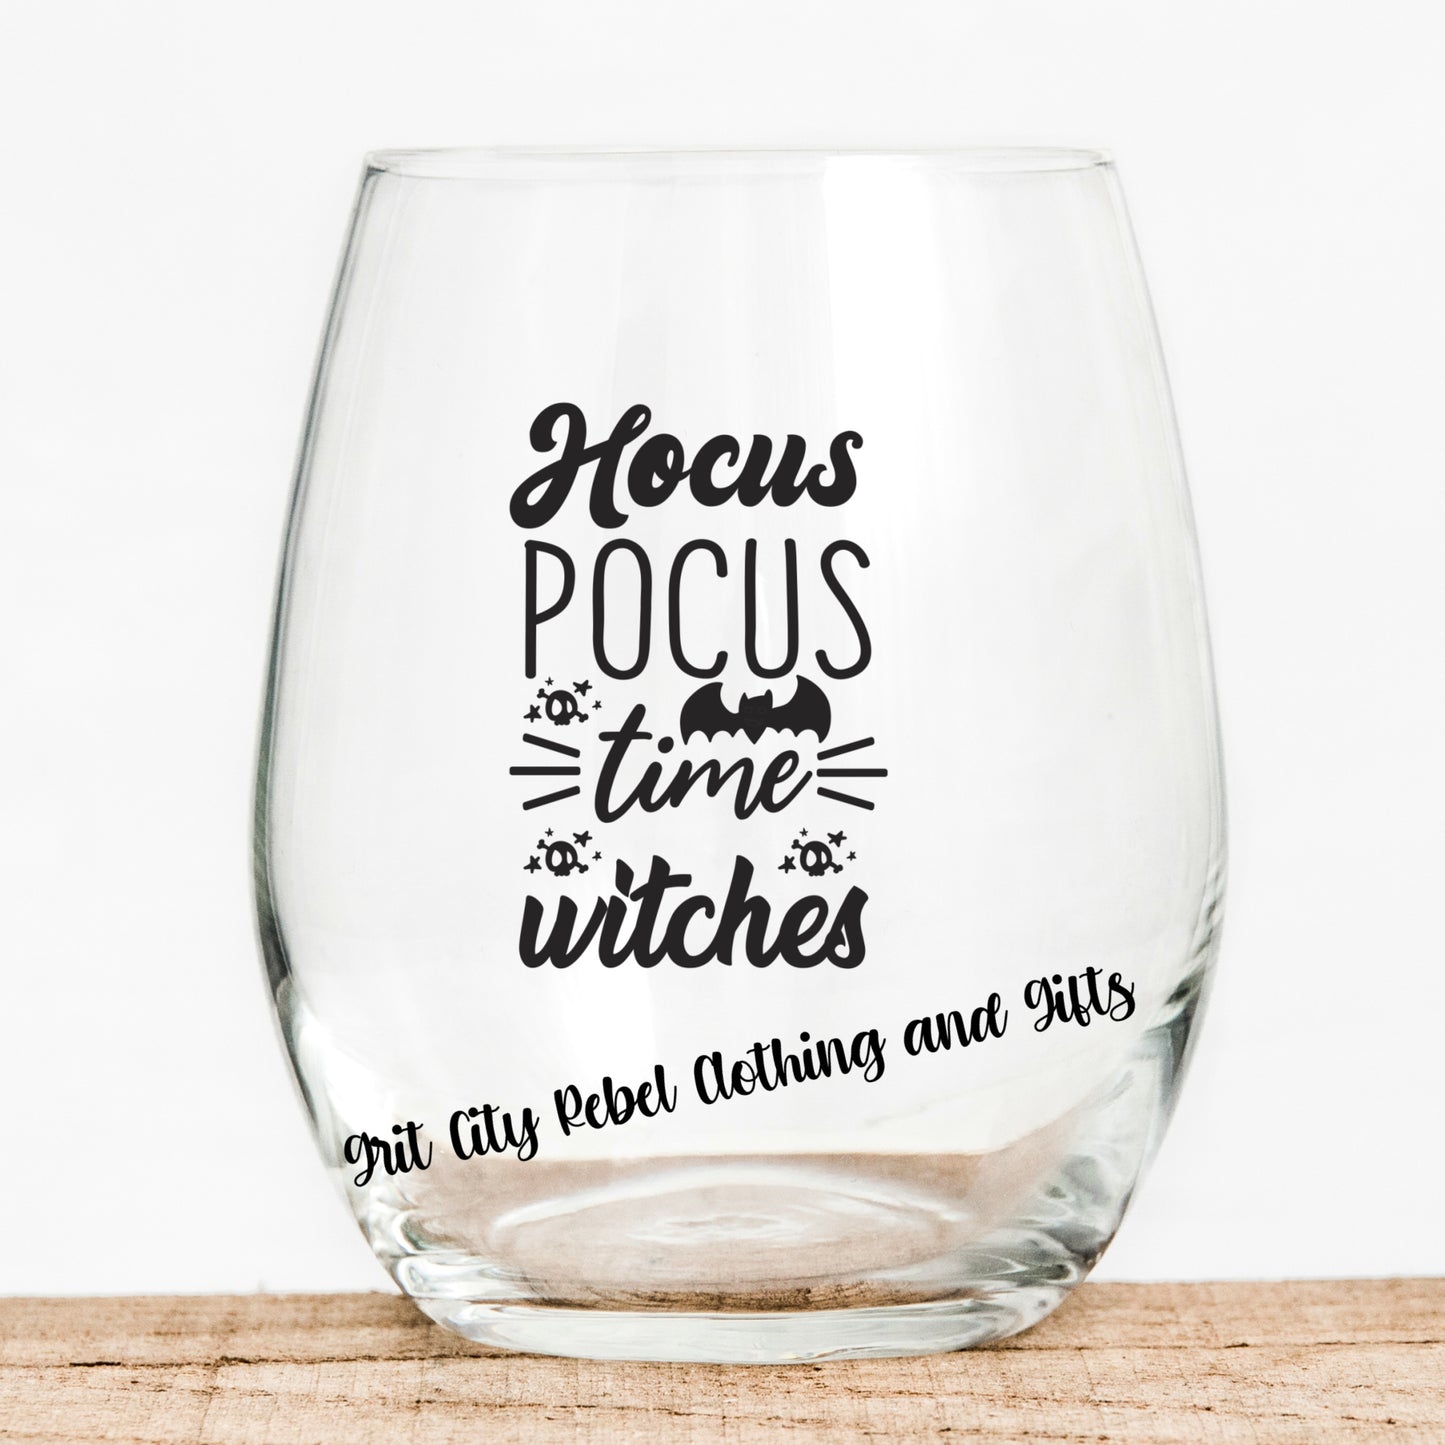 15oz Wine glass with the sayingHocu Pocus time Witches in black writing Grit City Rebel